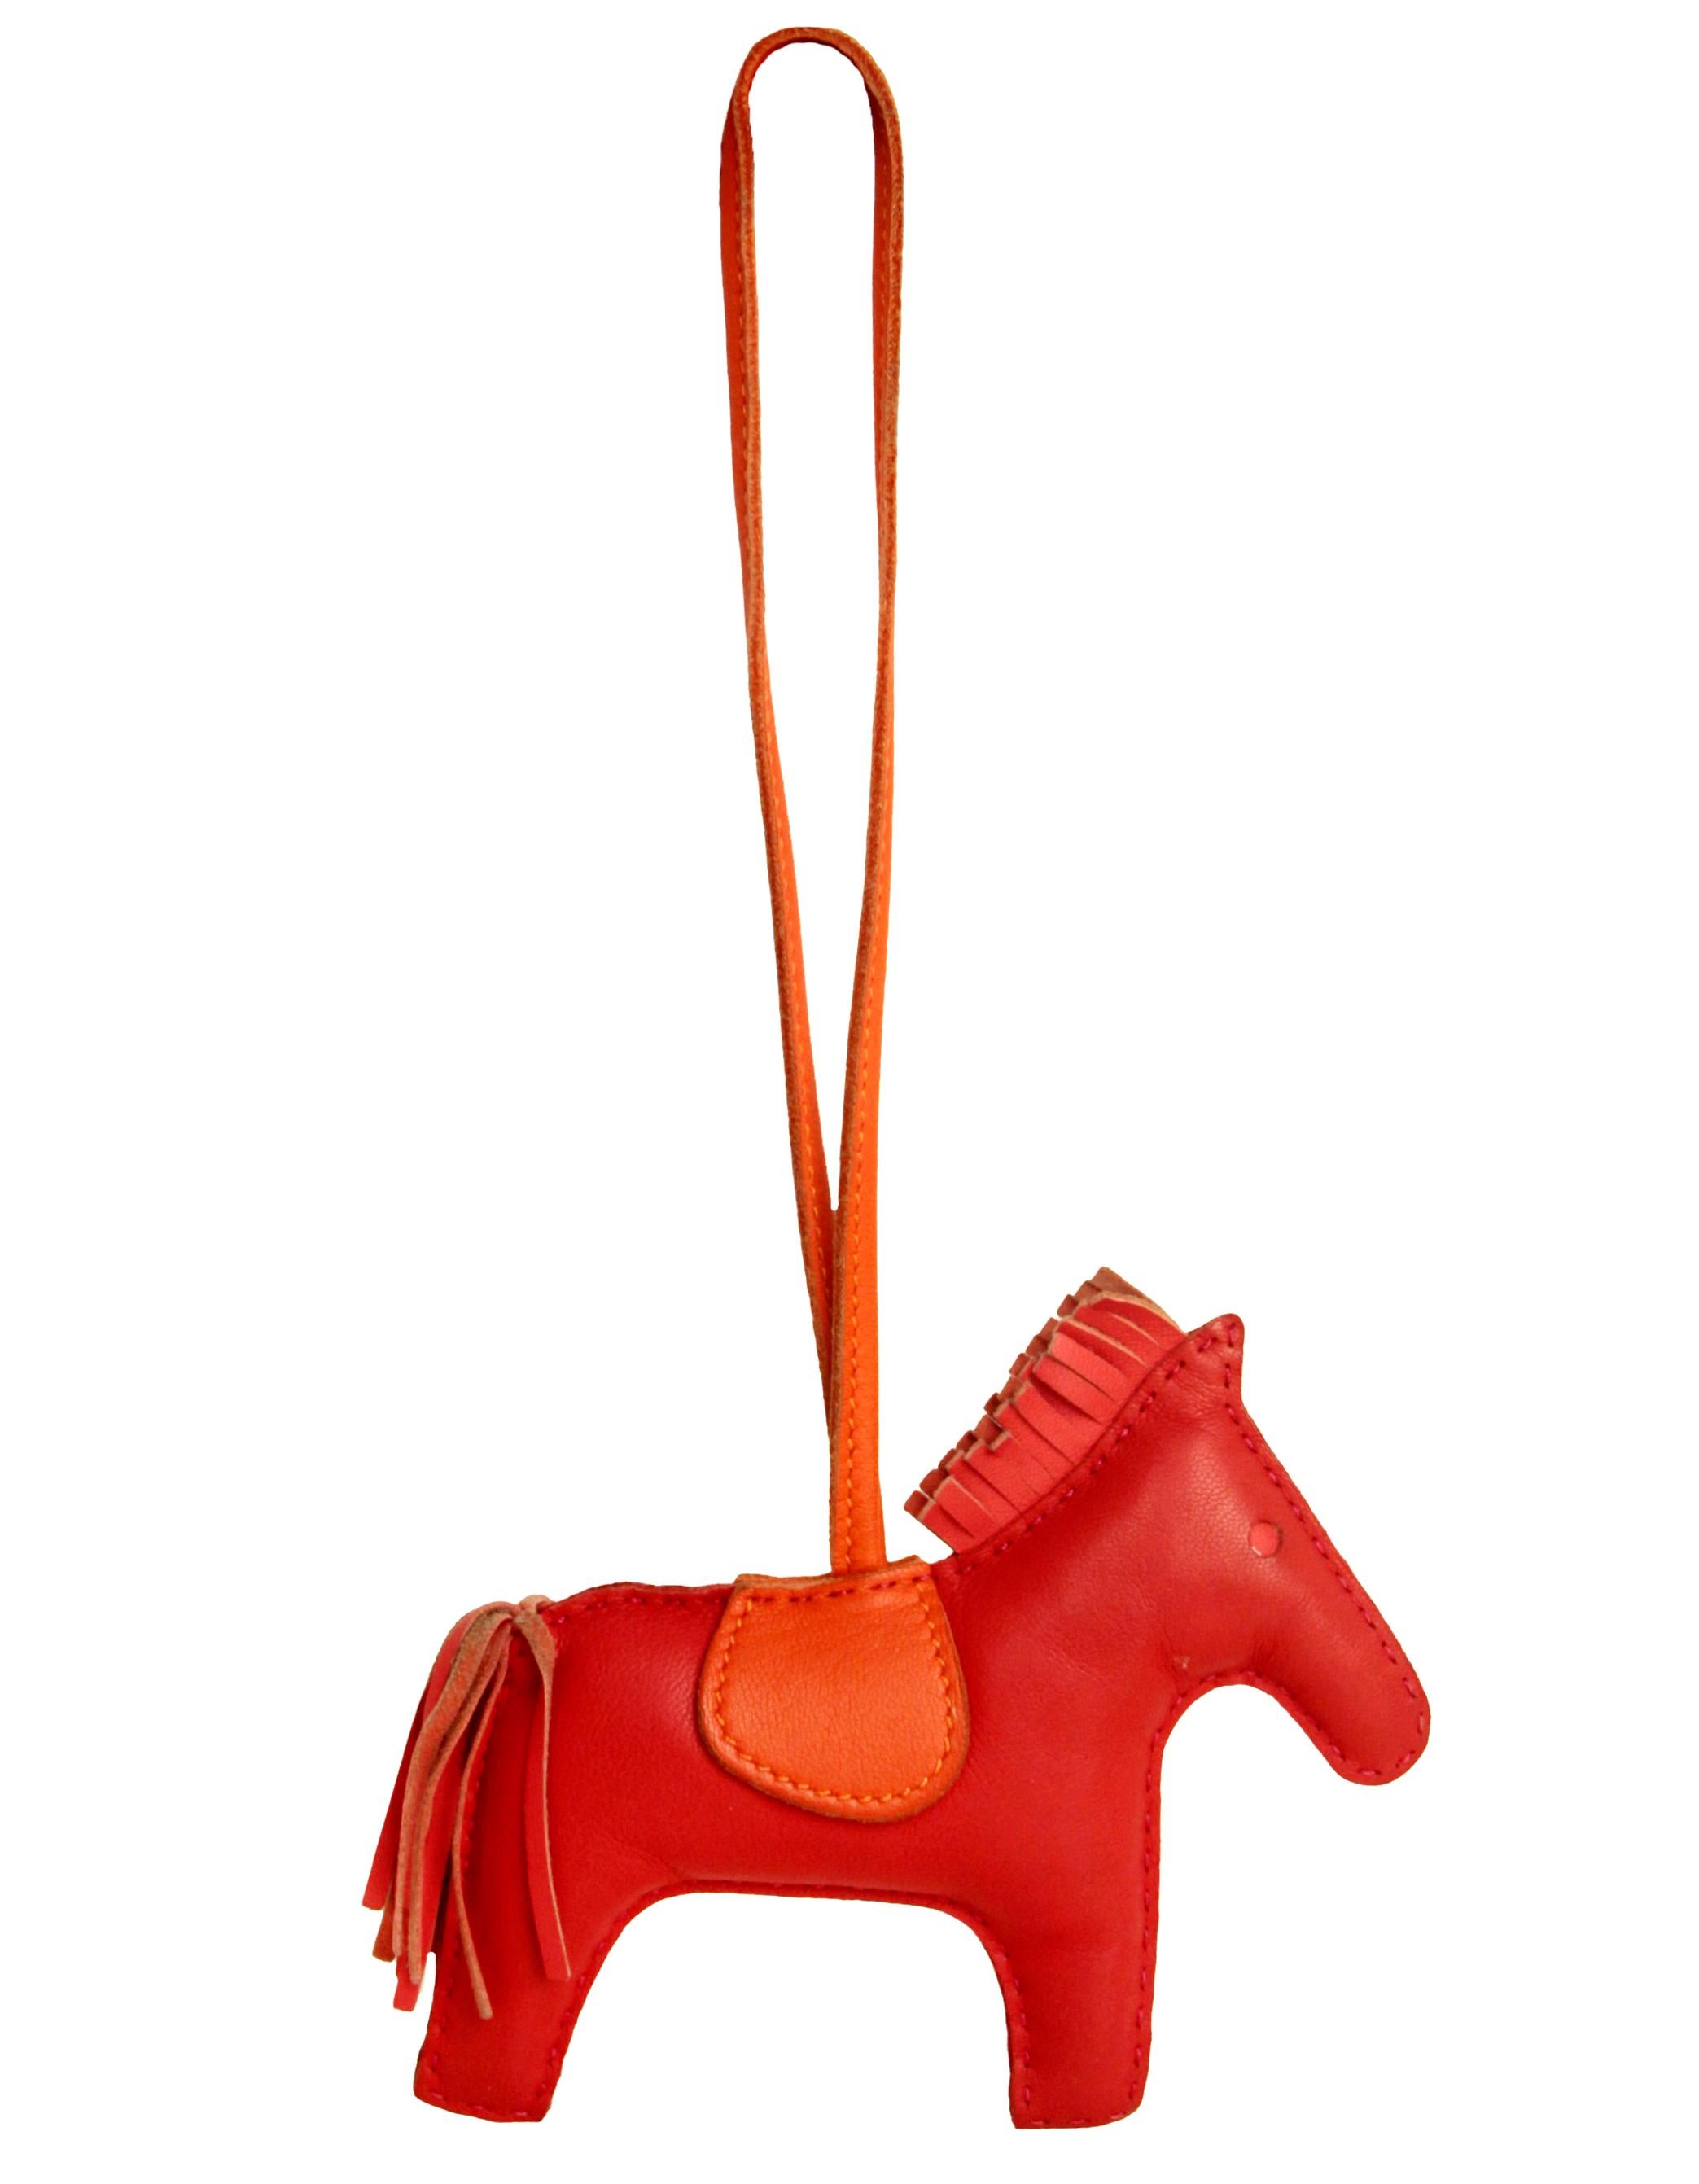 Hermes Red/Orange Rodeo MM Bag Charm
Made In: France
Color: Red and orange
Materials: Swift leather
Closure: Loop
Stamp: HERMES PARIS MADE IN FRANCE
Overall Condition: Excellent pre-owned condition
Measurements:
4.75